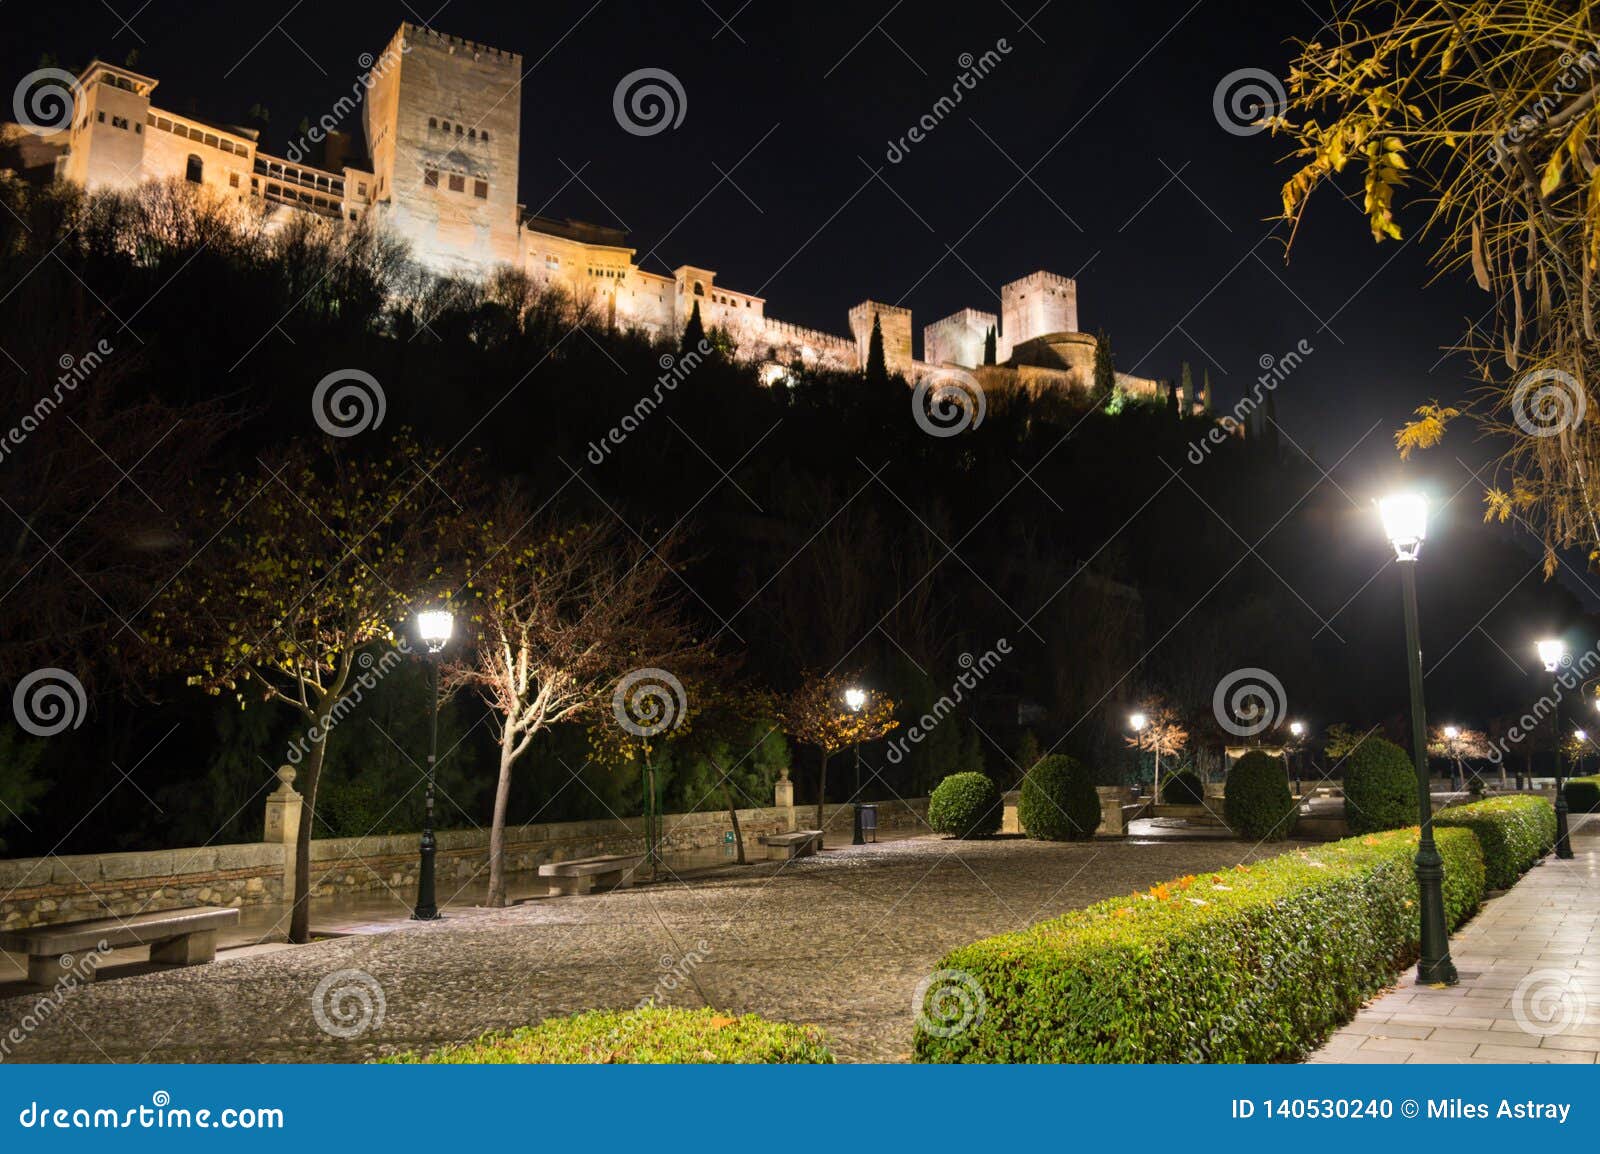 alhambra in granada, spain as seen from paseo de los tristes